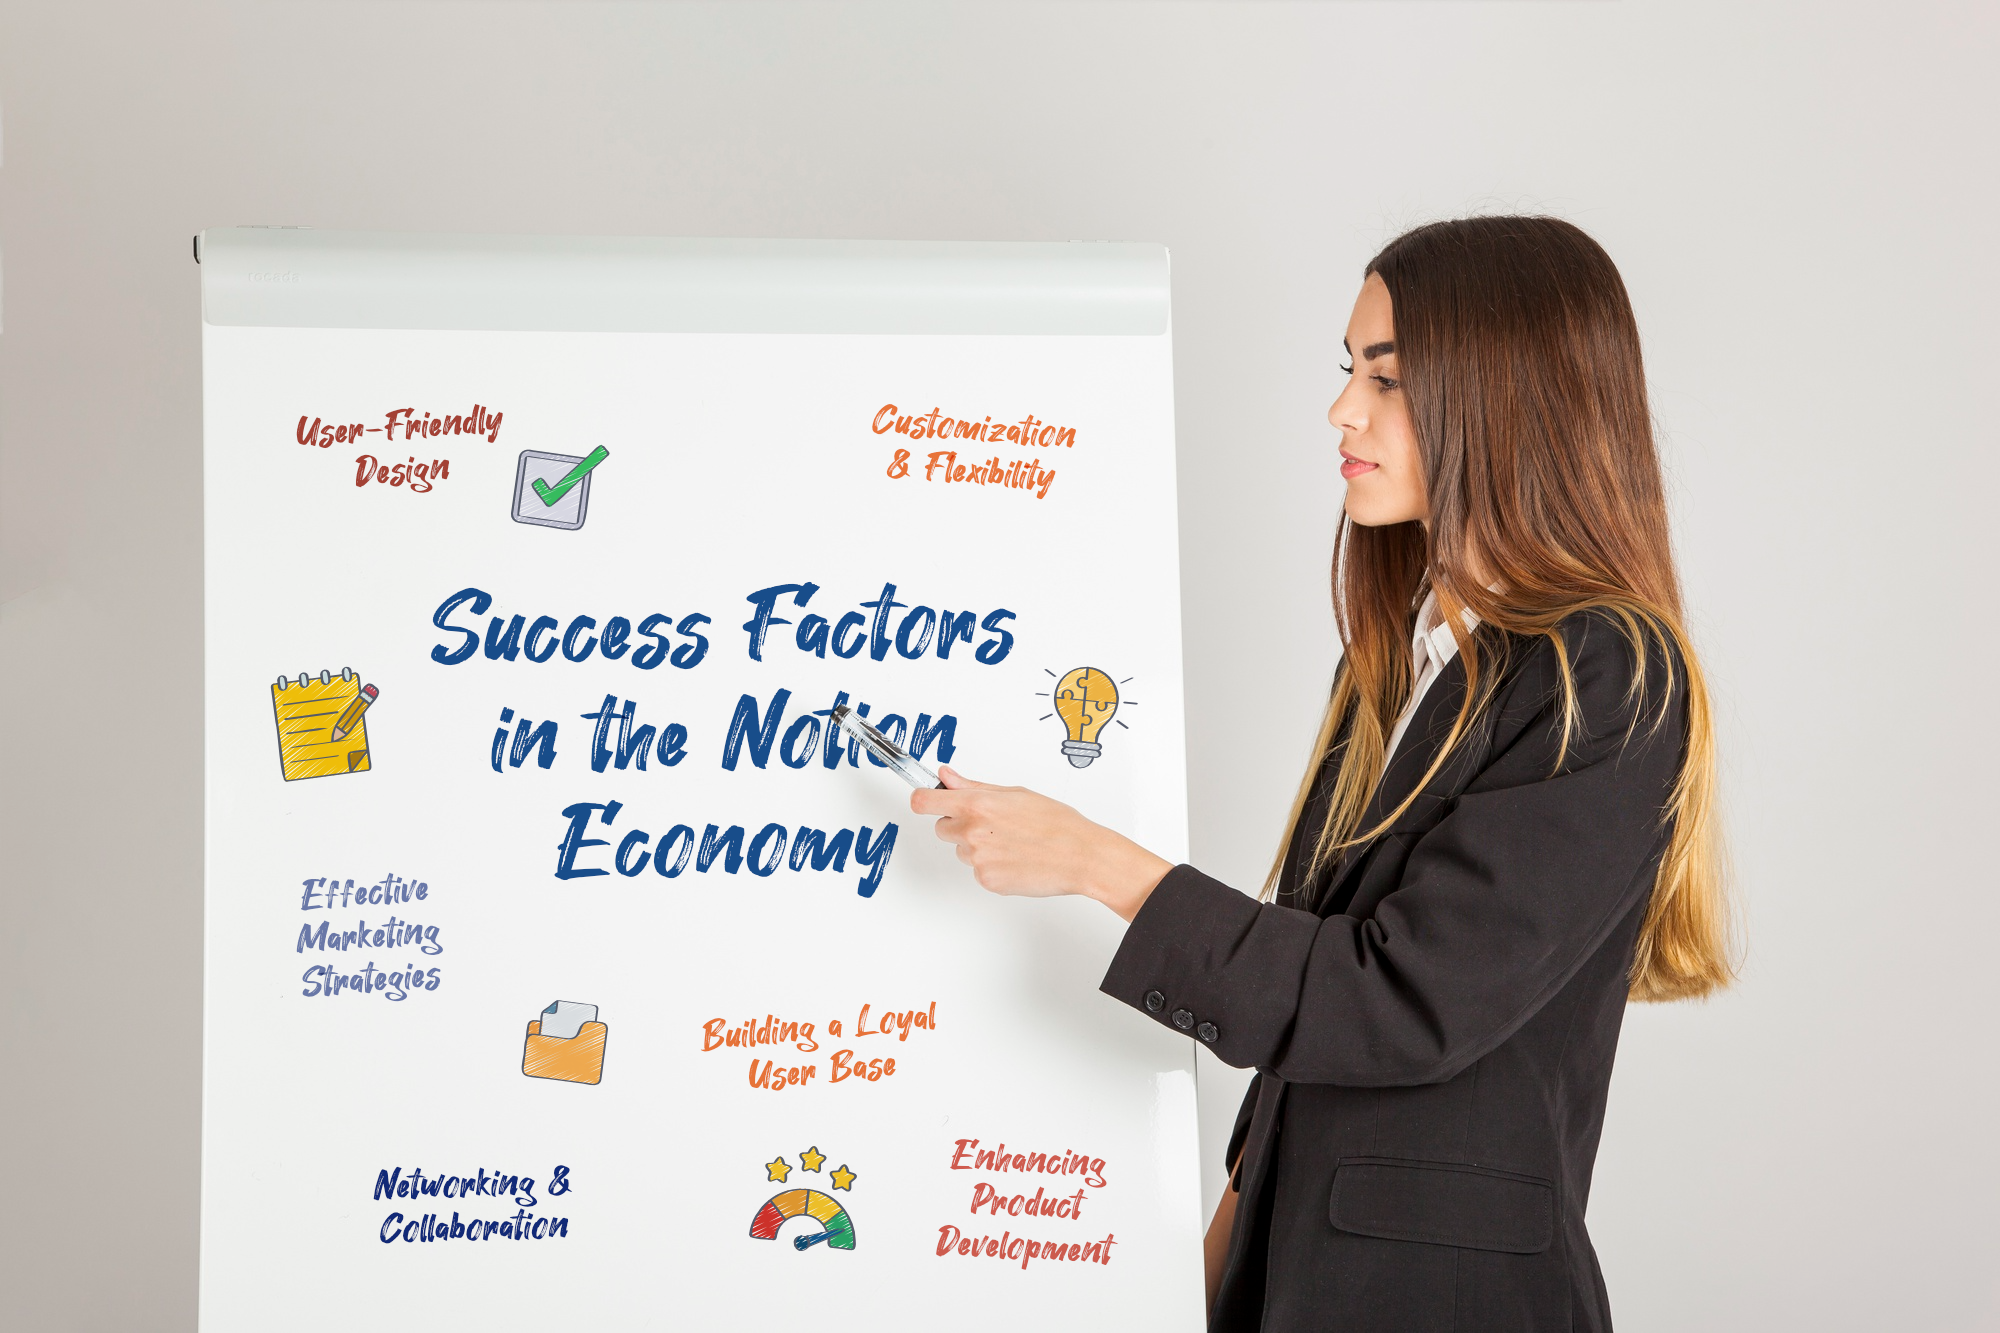 A woman pointing to a poster showing success factors in the Notion economy